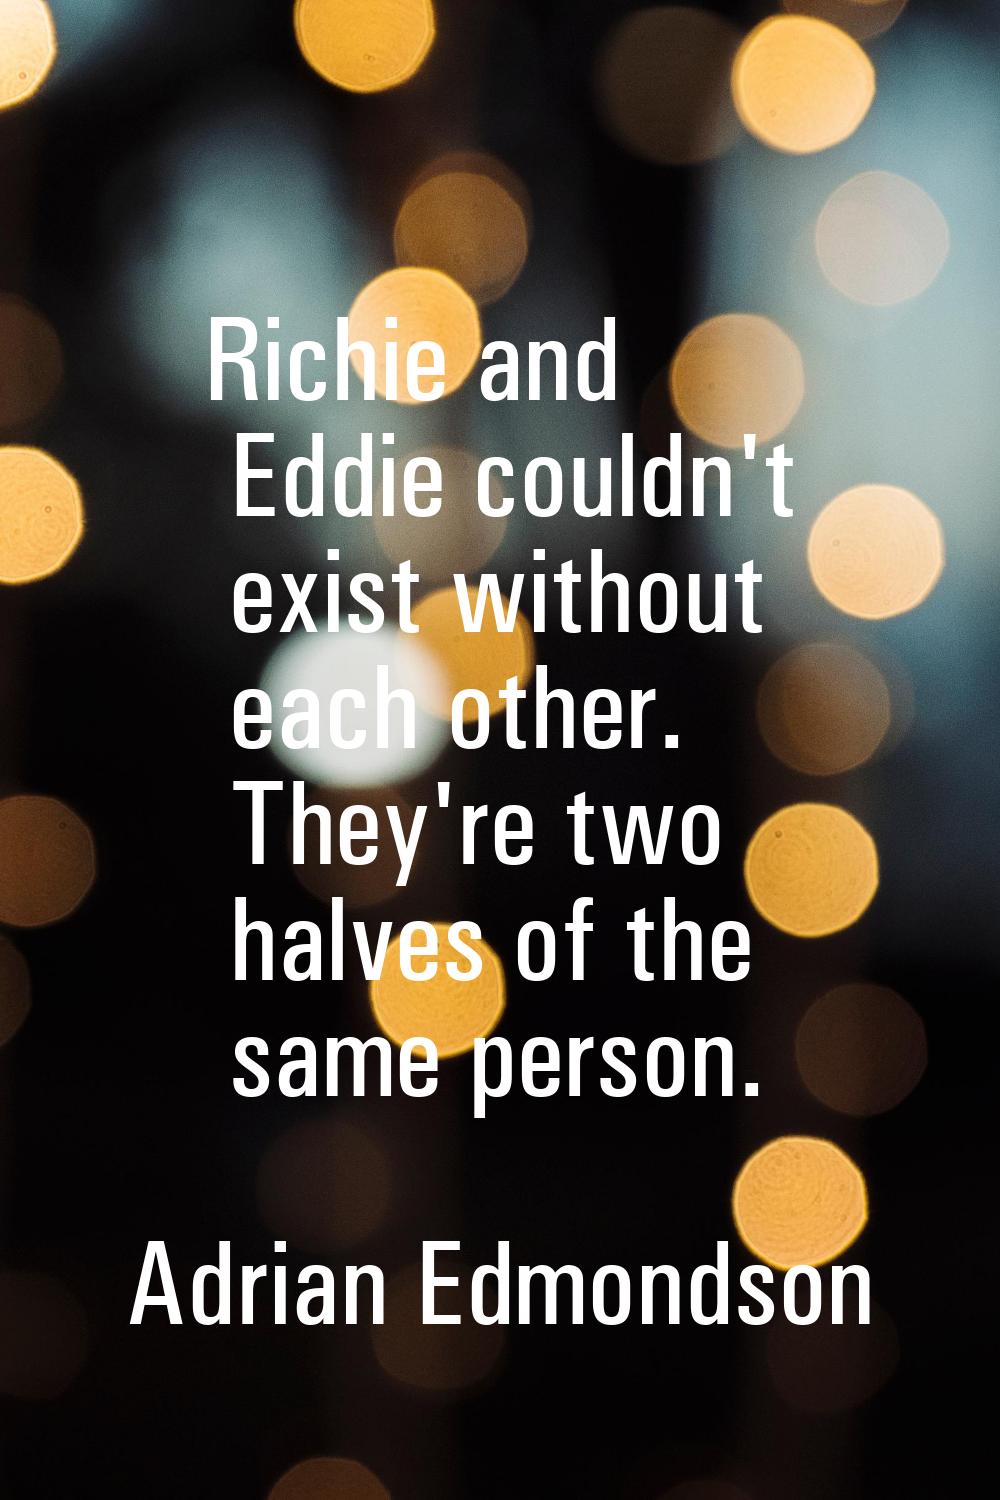 Richie and Eddie couldn't exist without each other. They're two halves of the same person.